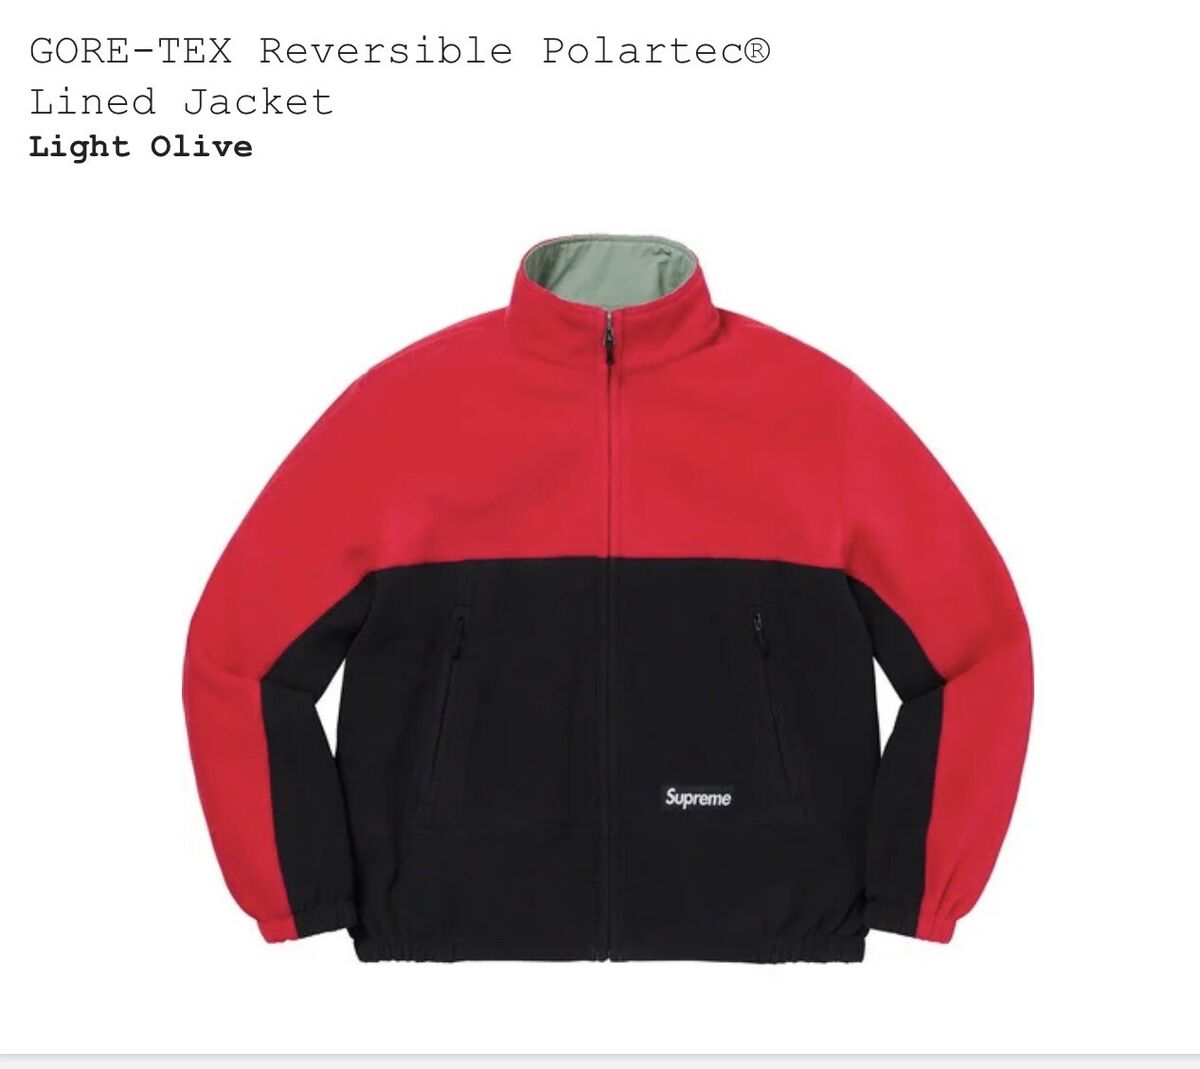 Supreme SS22 GORE-TEX Reversible Polartec Lined Jacket Large Olive SOLD OUT  DS